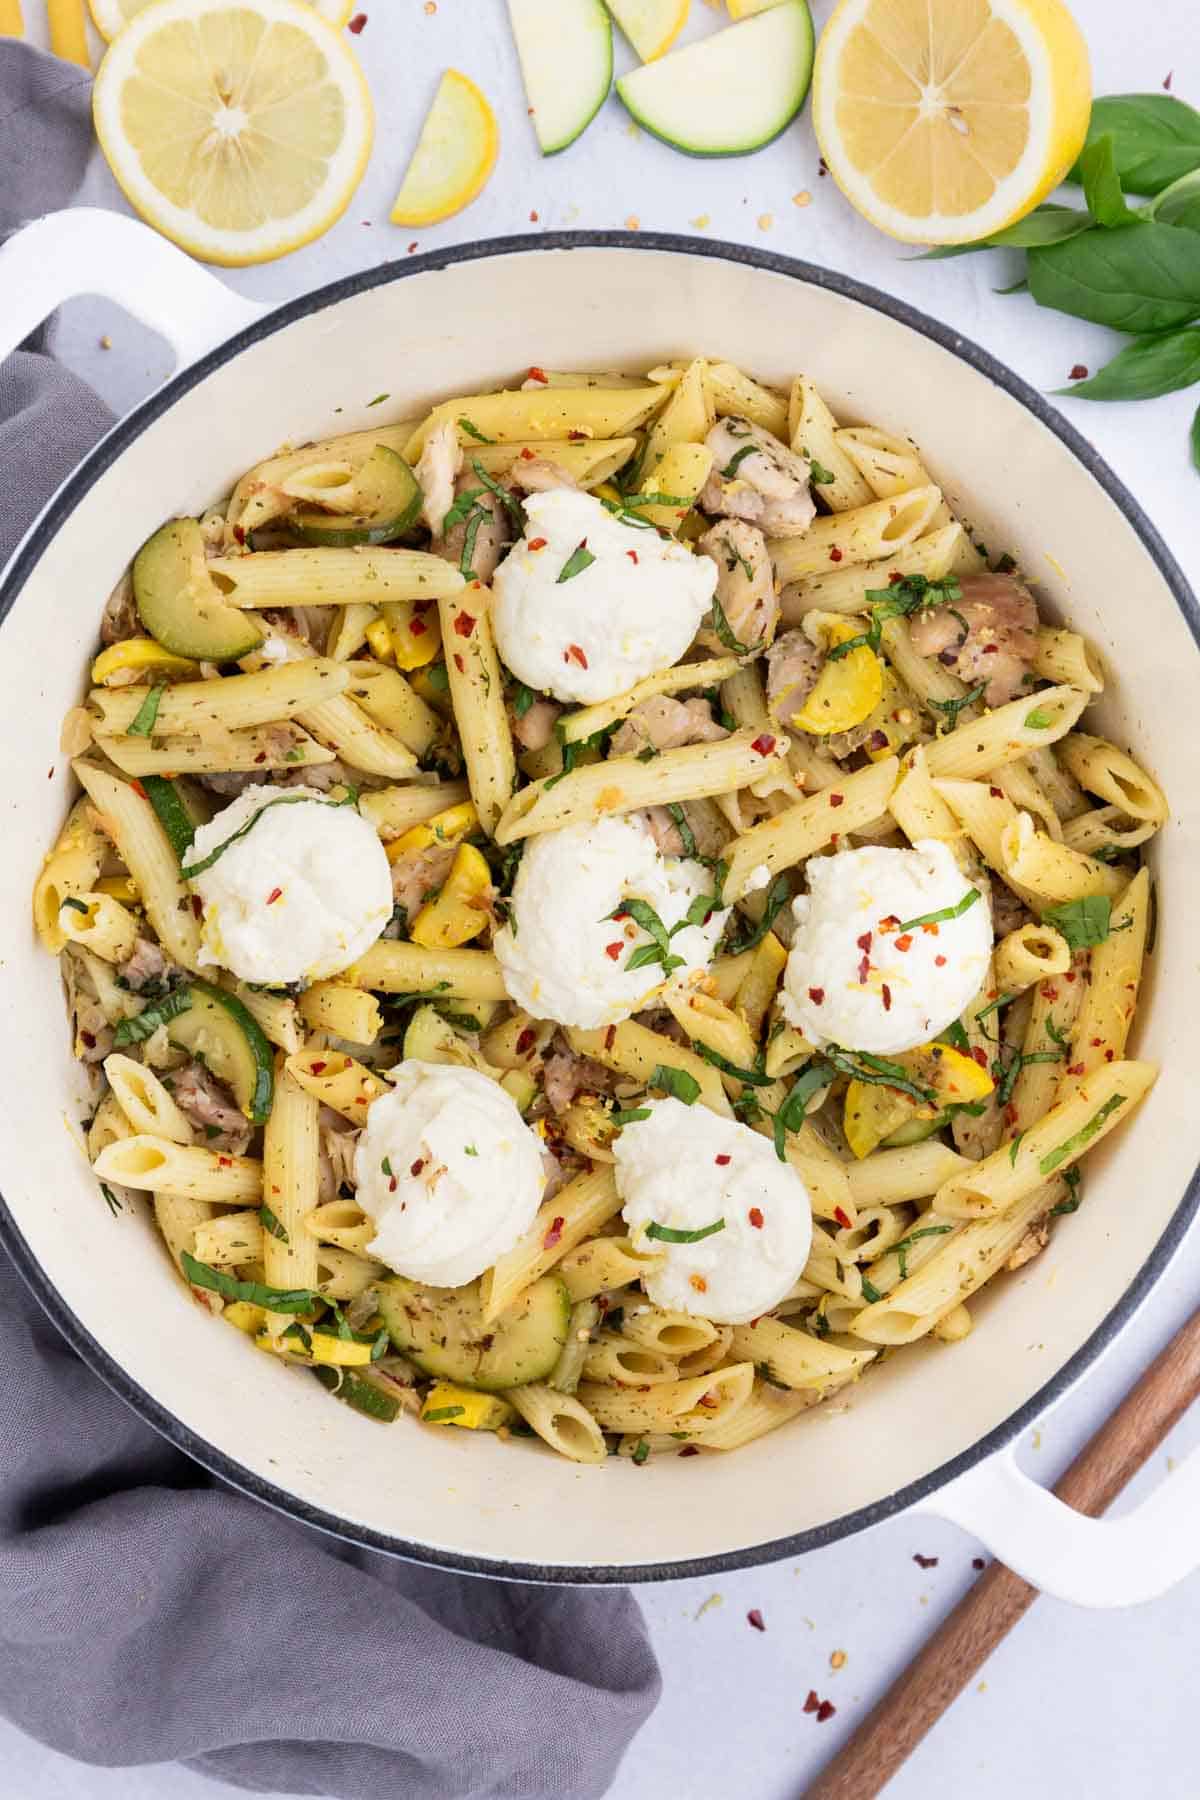 Chicken, veggies, and noodles are tossed with a lemon sauce and ricotta cheese and cooked on the stoveotp.